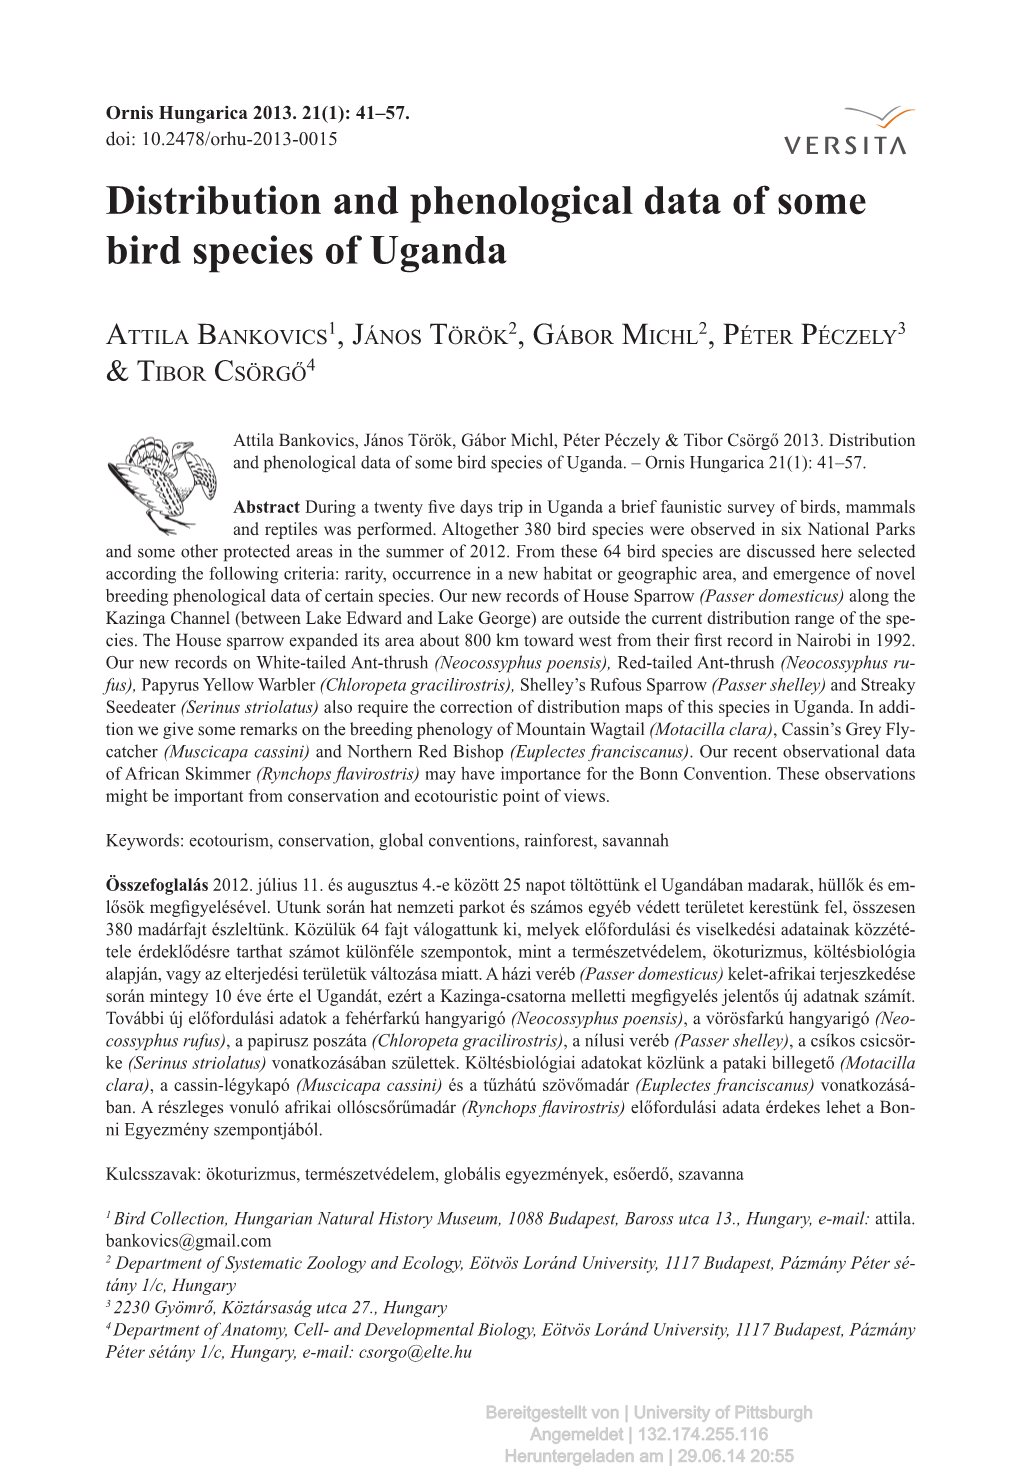 Distribution and Phenological Data of Some Bird Species of Uganda